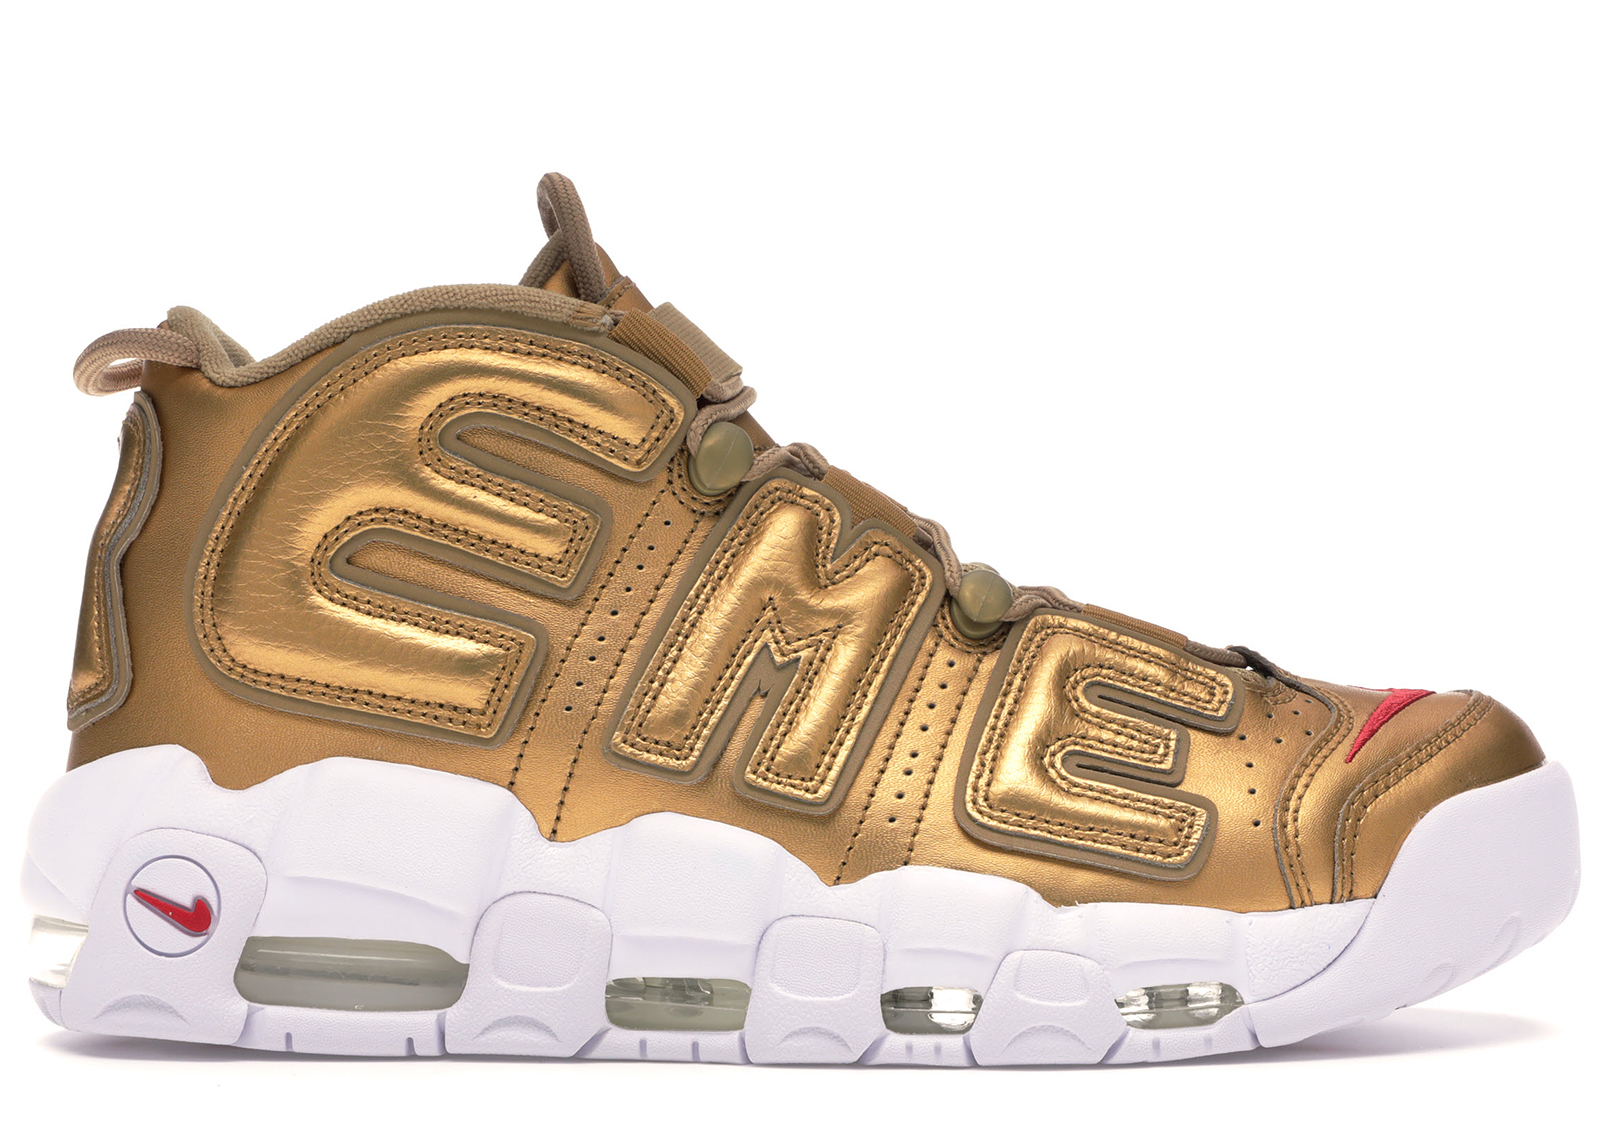 Nike Air More Uptempo Supreme Suptempo Gold メンズ - 902290-700 - JP